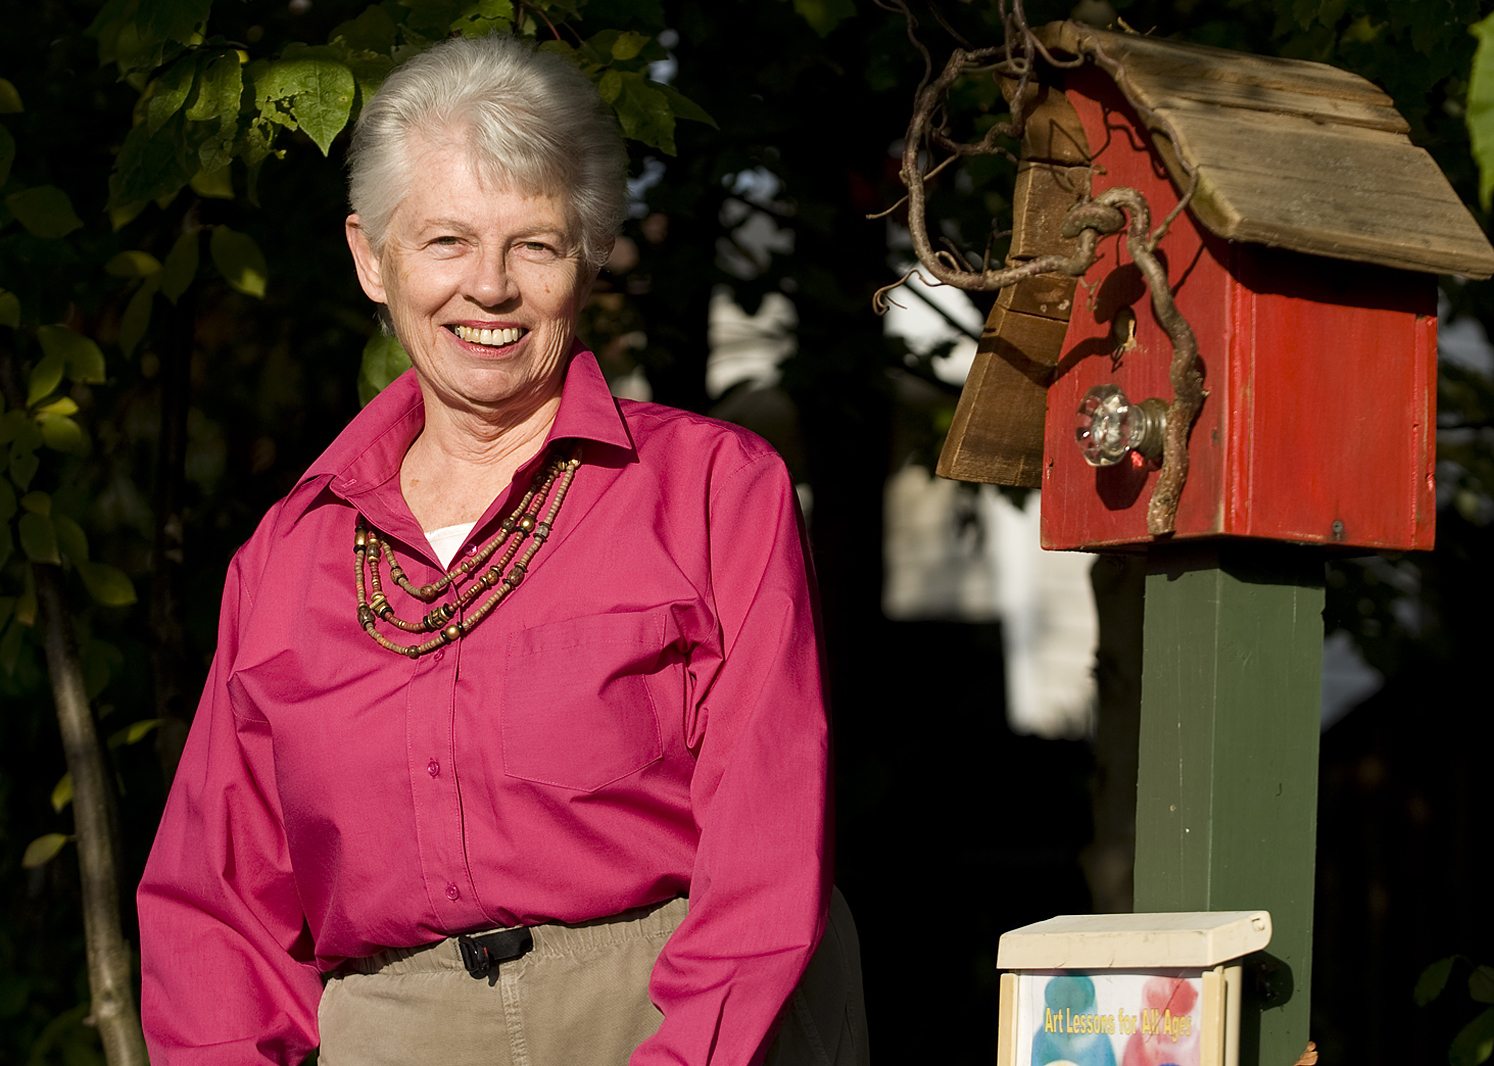 Artist Kathy Winters, shown, Thursday, November 3, 2011, has helped organize a movement in Ridgefield to put up word houses, bird houses with a box to put art, stories, poetry, etc.